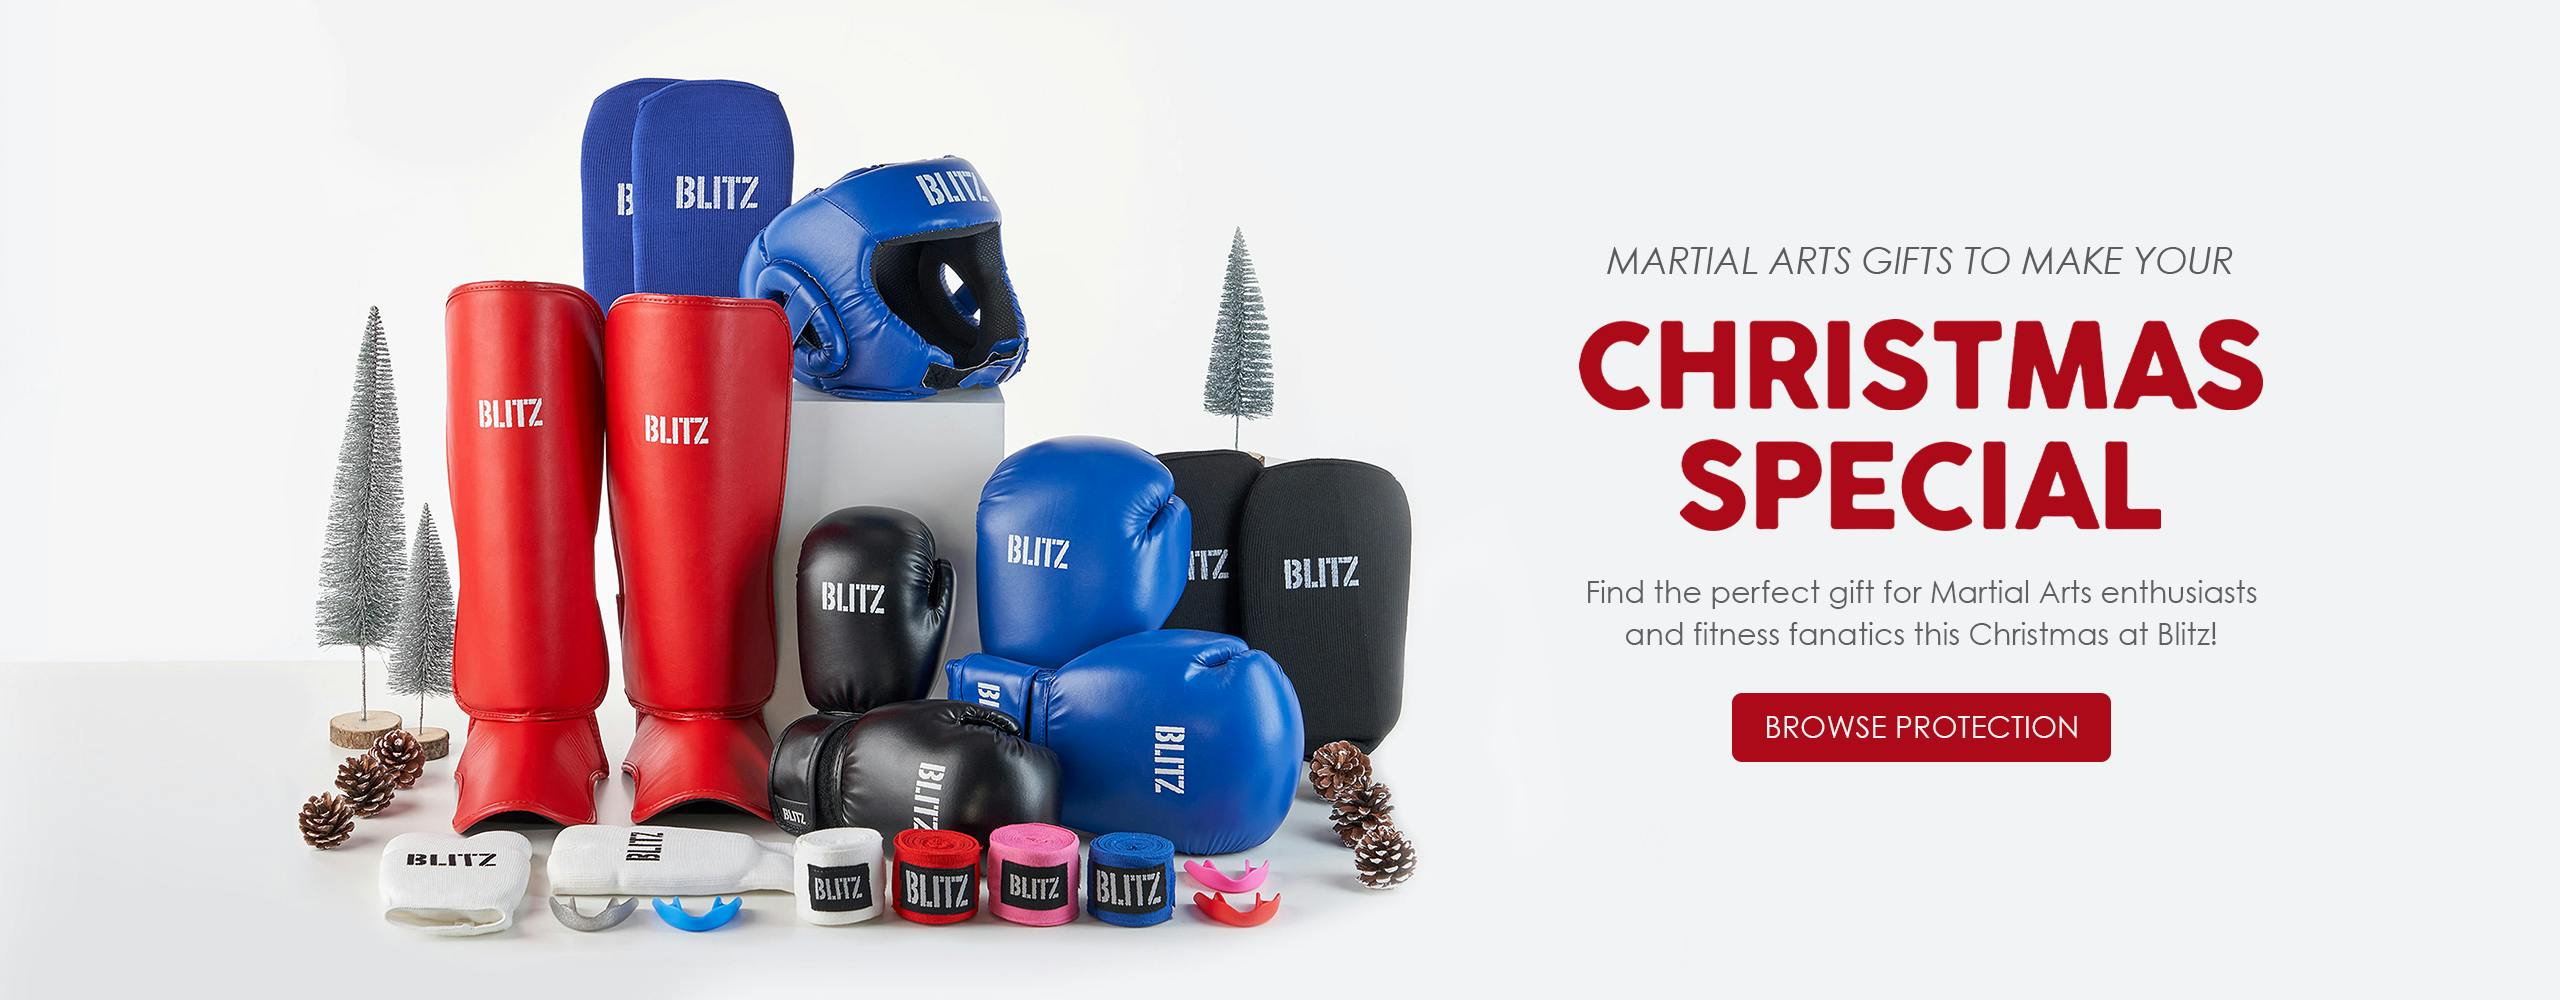 Find the perfect gift for Martial Arts enthusiasts and fitness fanatics this Christmas at Blitz!